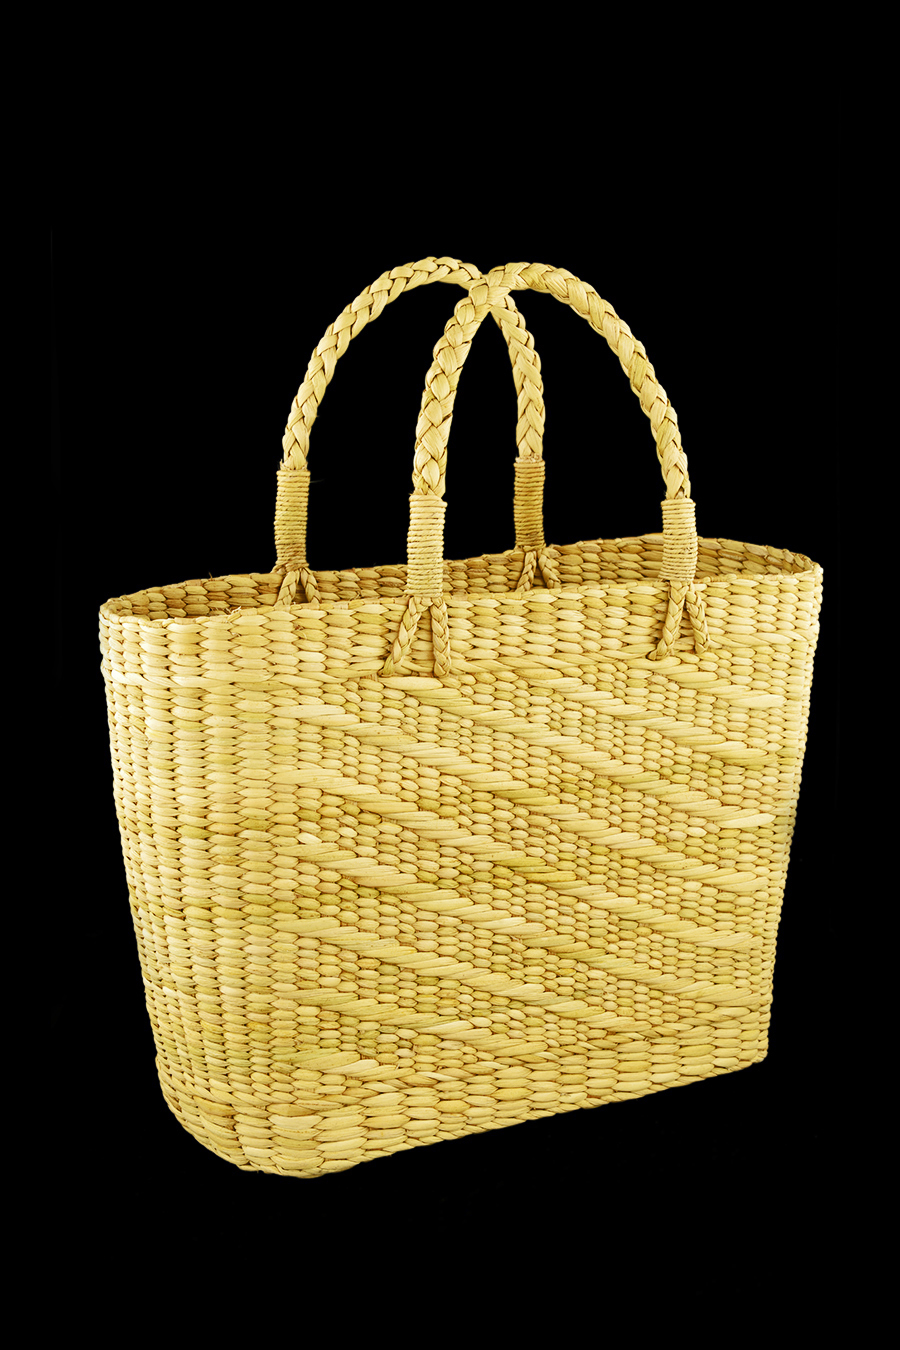 Marketing Bag With Braided Handle 